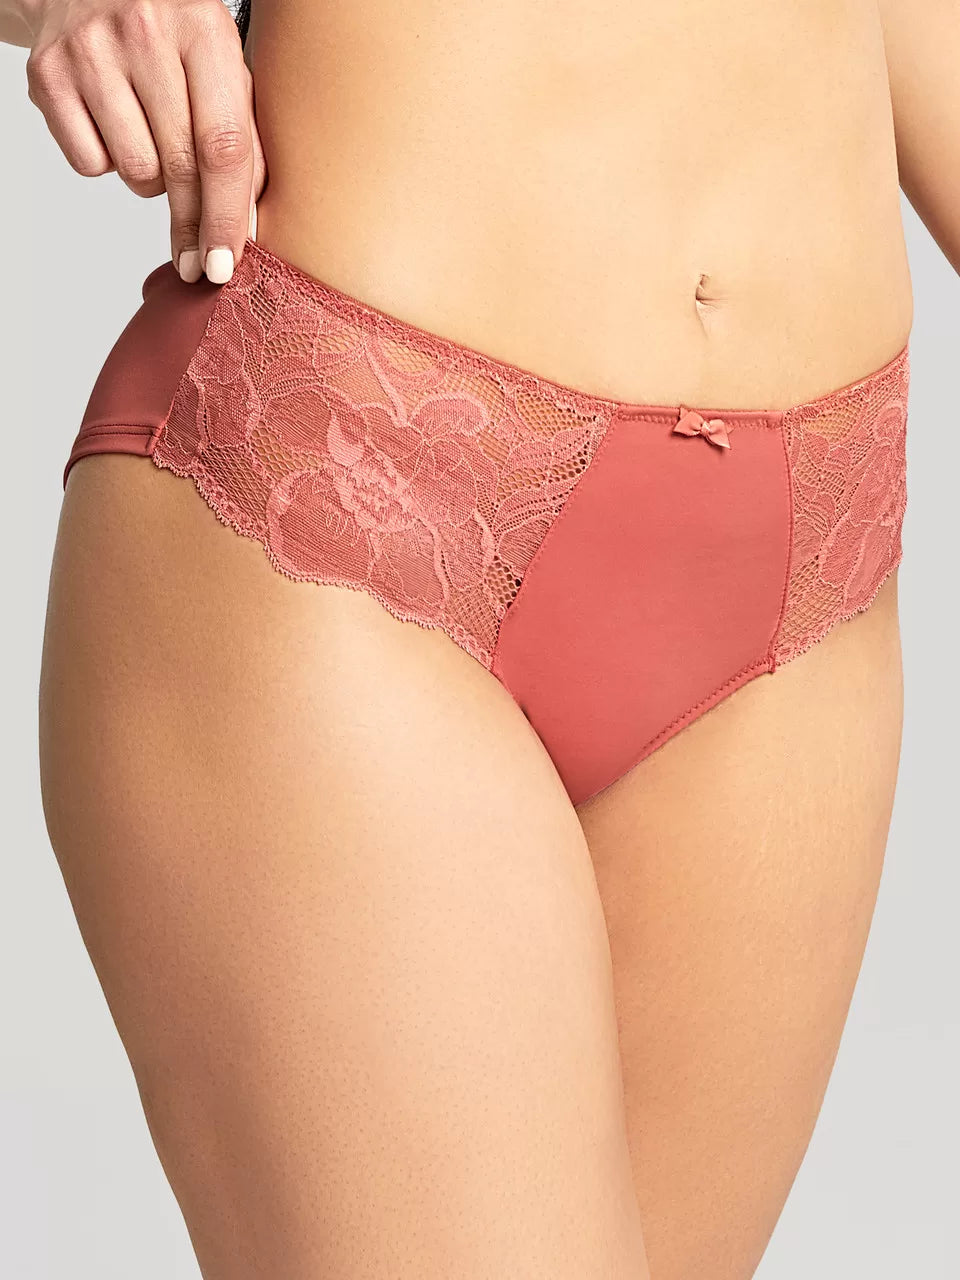 Rocha High-Waisted brief from Panache at Belle Lacet Lingerie